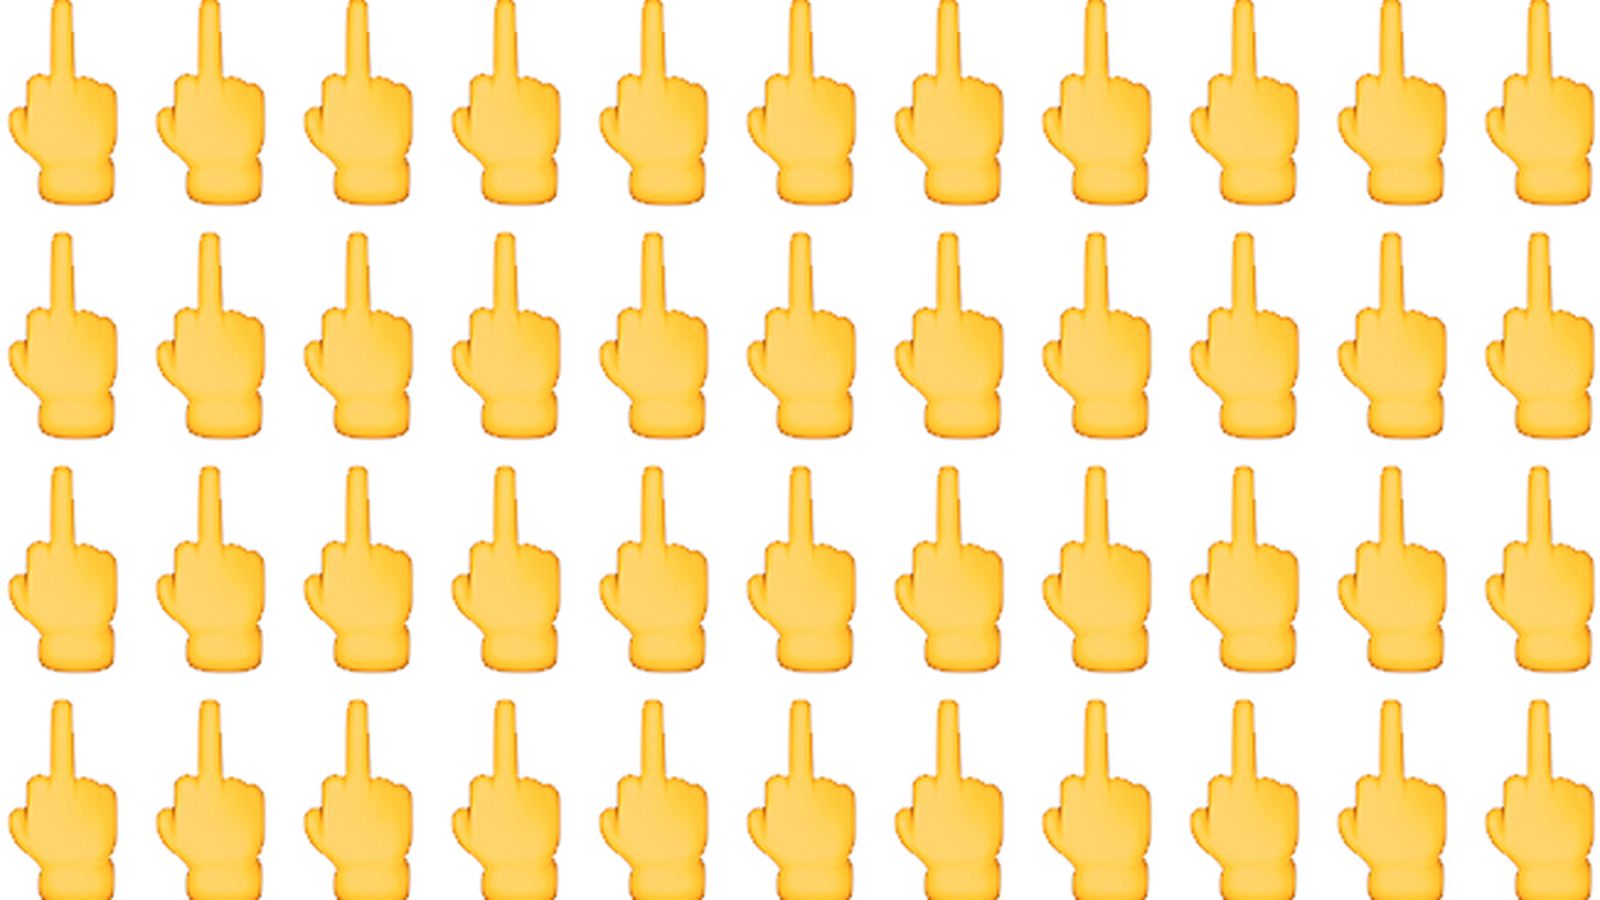 iOS 9.1 will let you send people the middle finger emoji